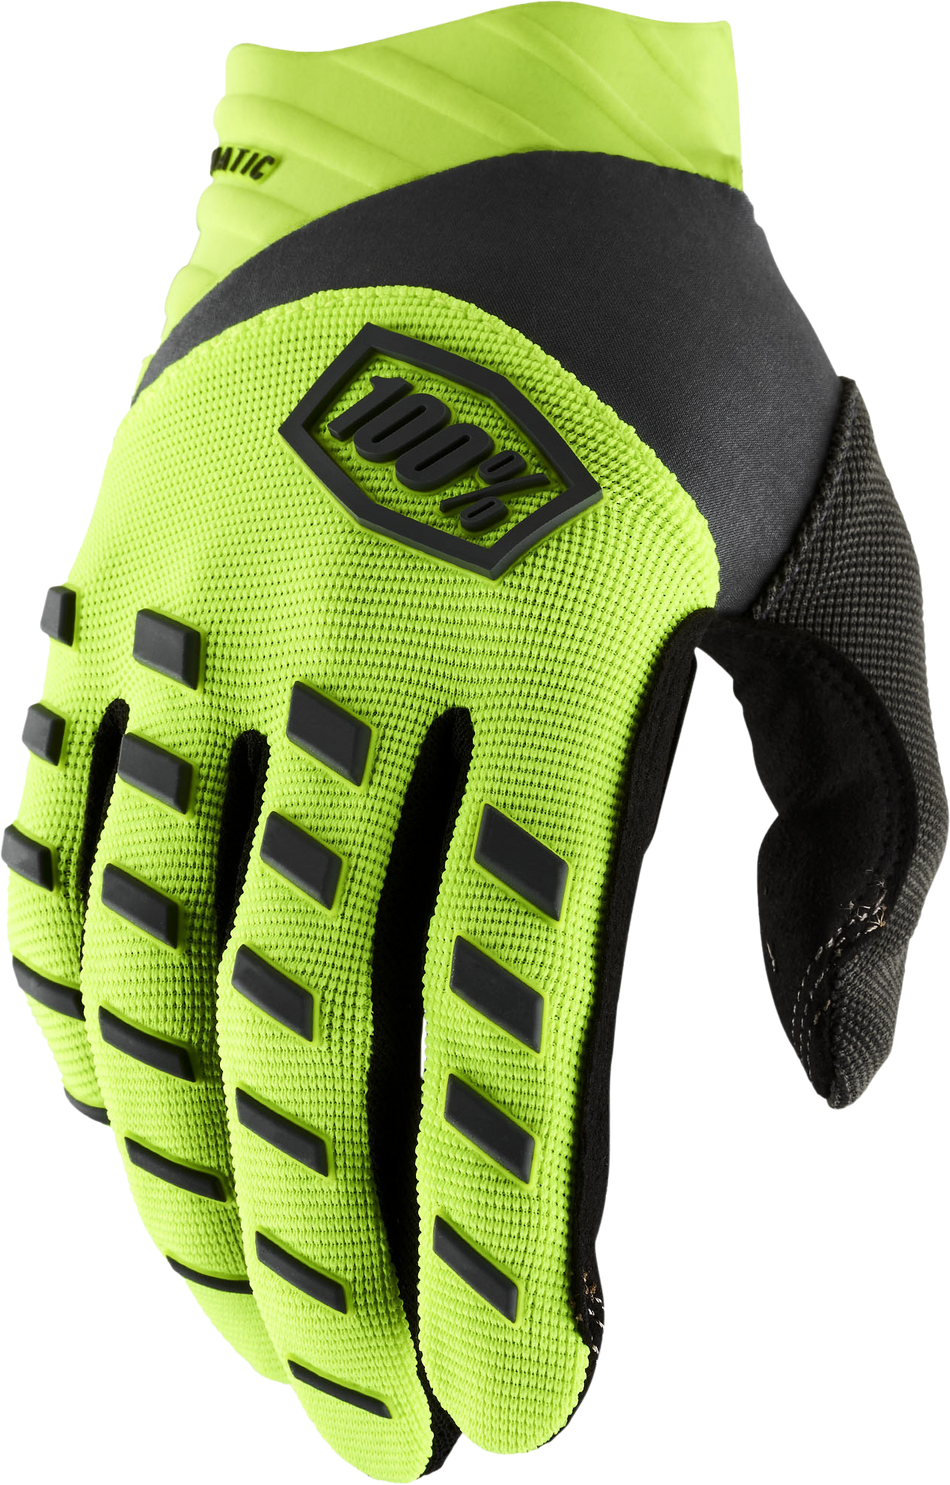 100% Airmatic Youth Gloves Fluo Yellow/Black Md 10001-00005